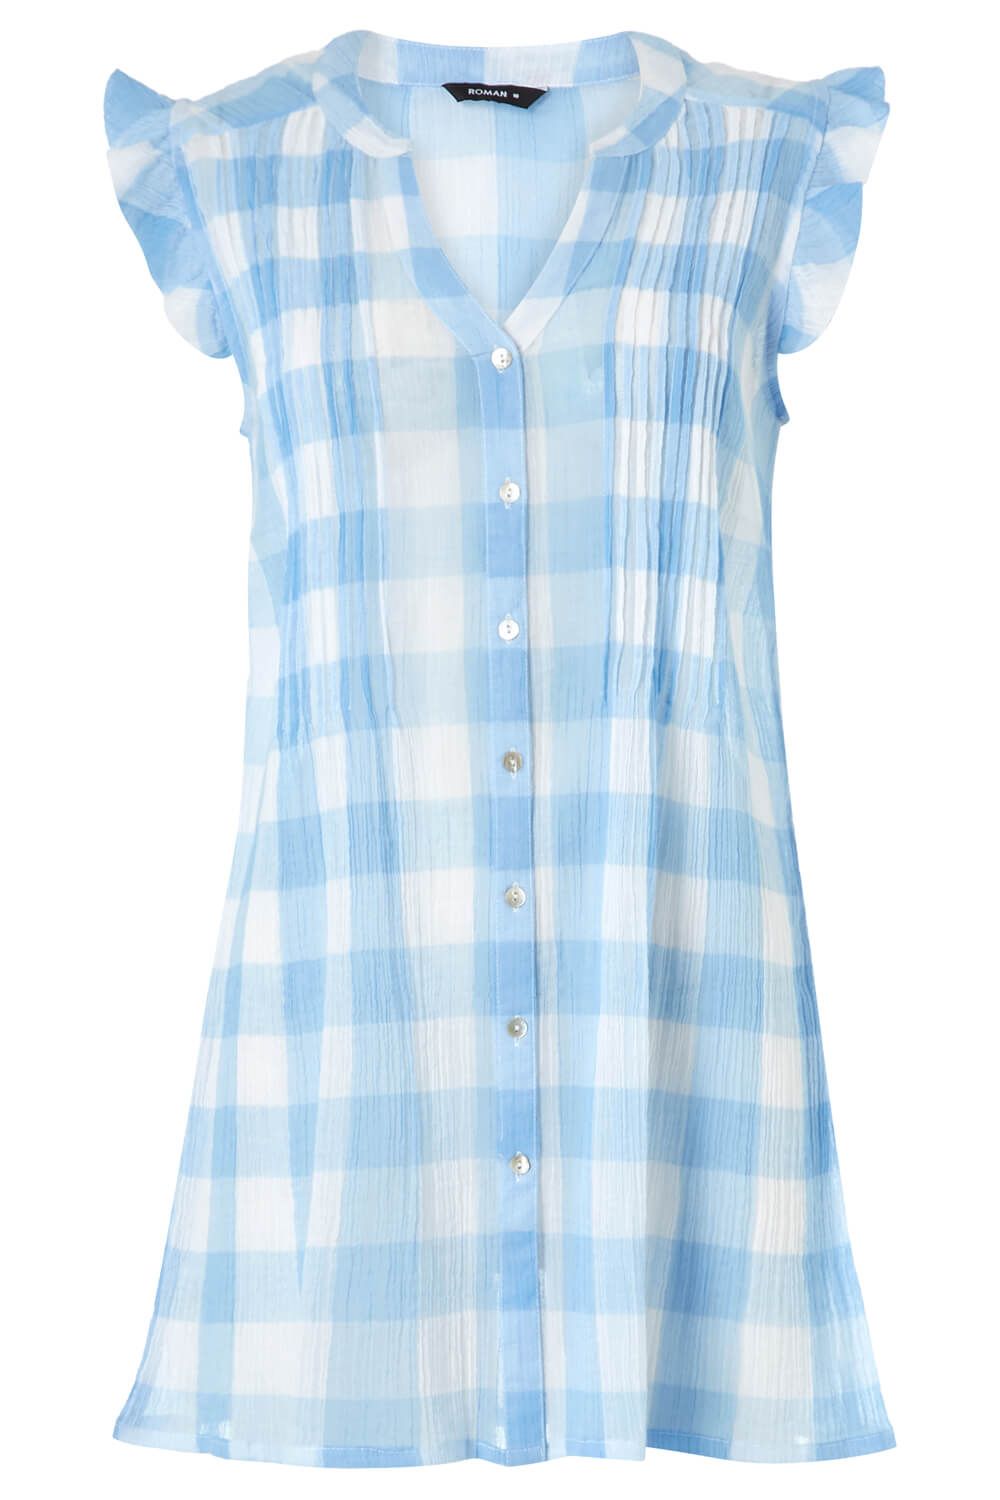 Light Blue  Check Pintuck Detail Blouse Top, Image 4 of 8